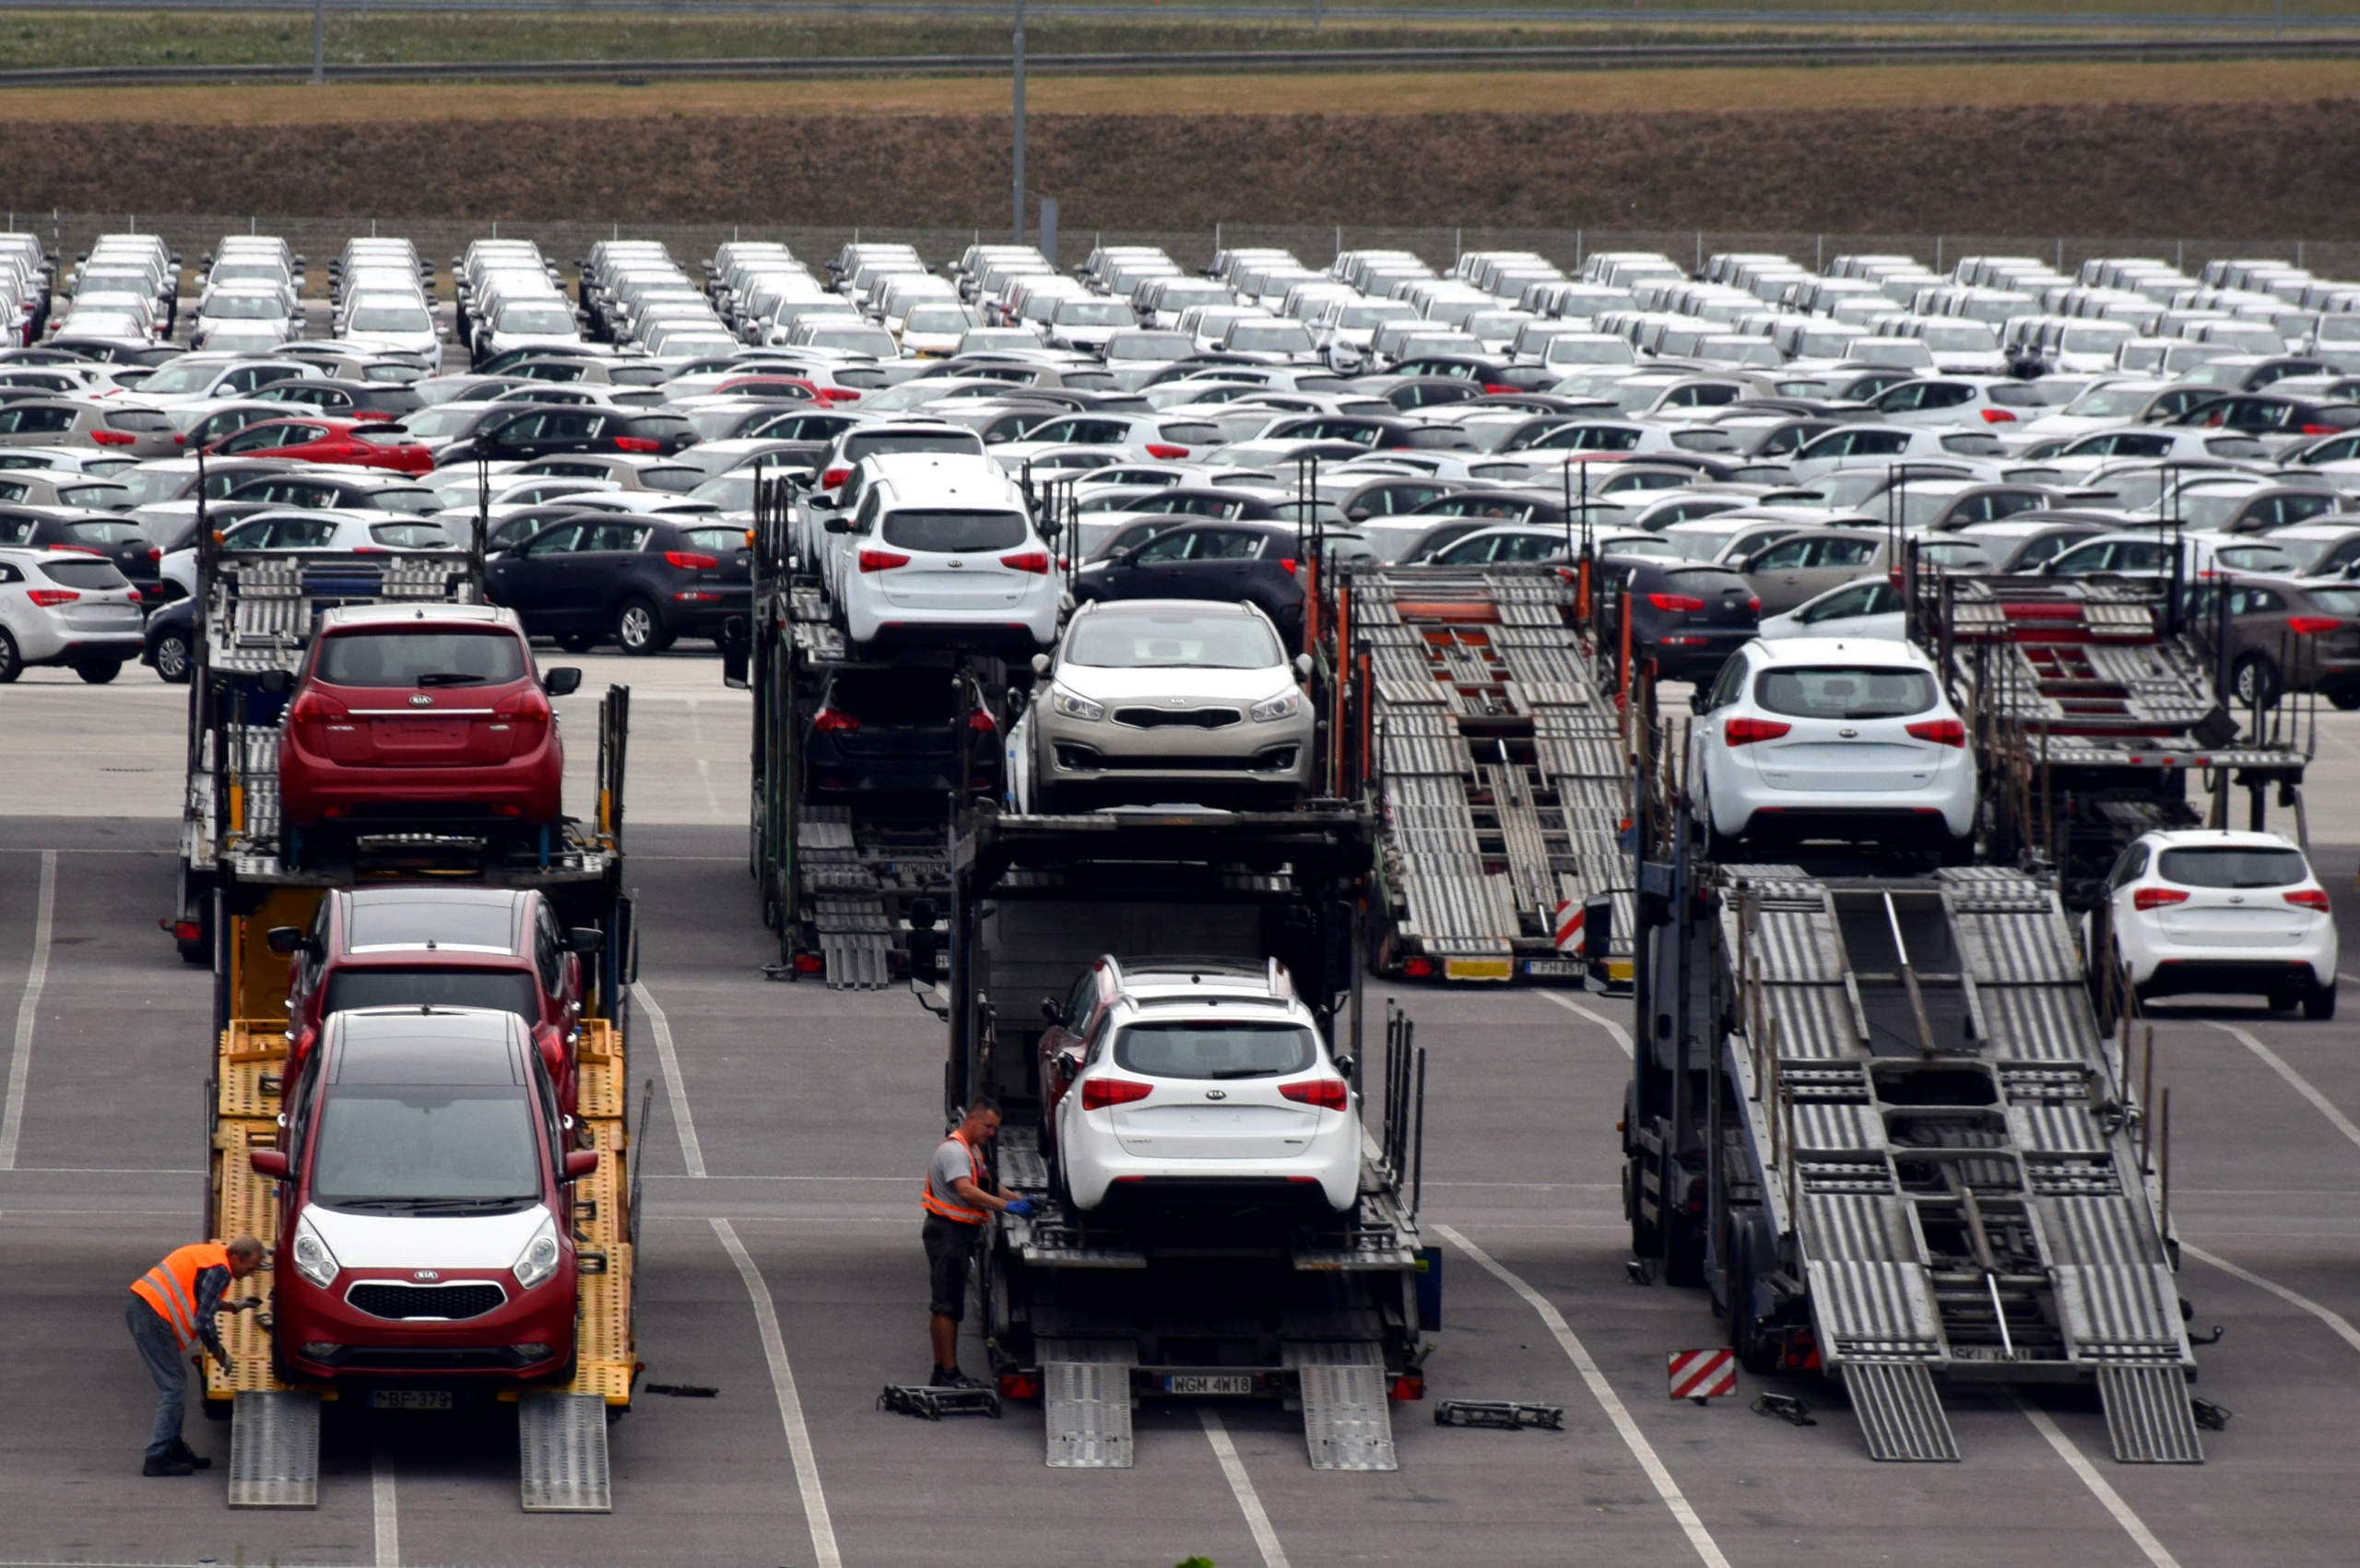 Mexico is the fourth largest vehicle exporter worldwide